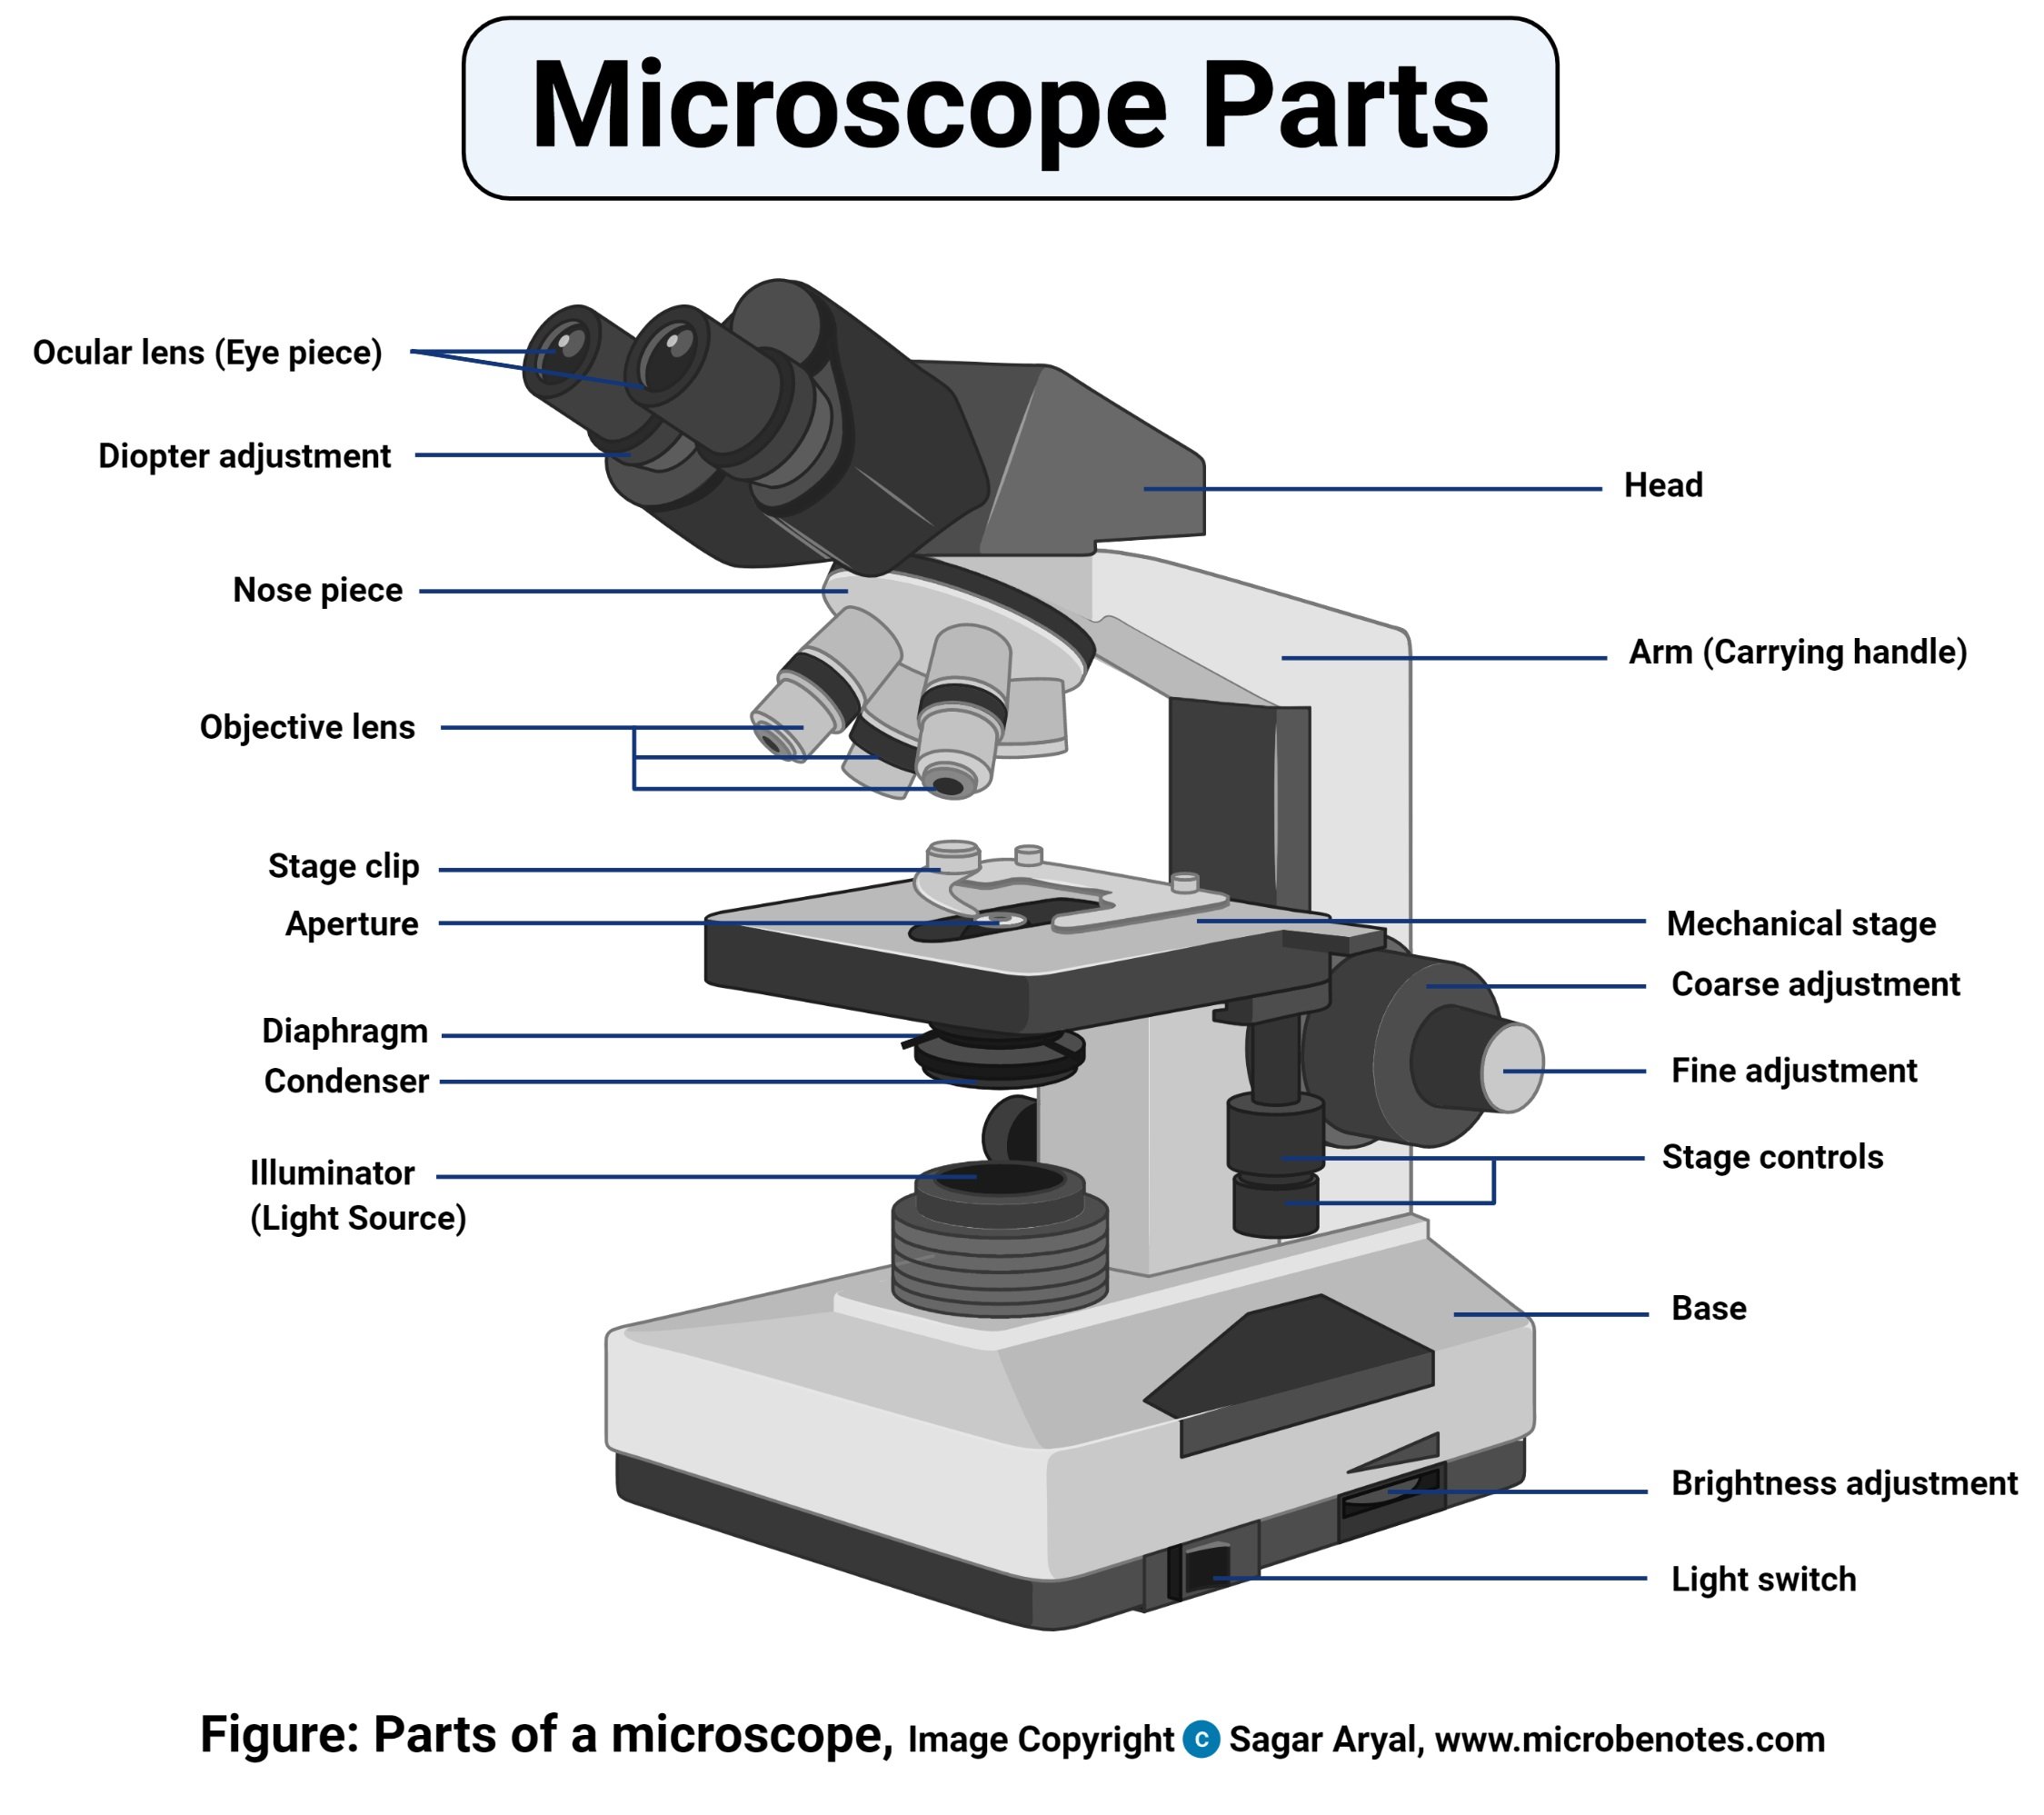 Diagram of parts of a microscope